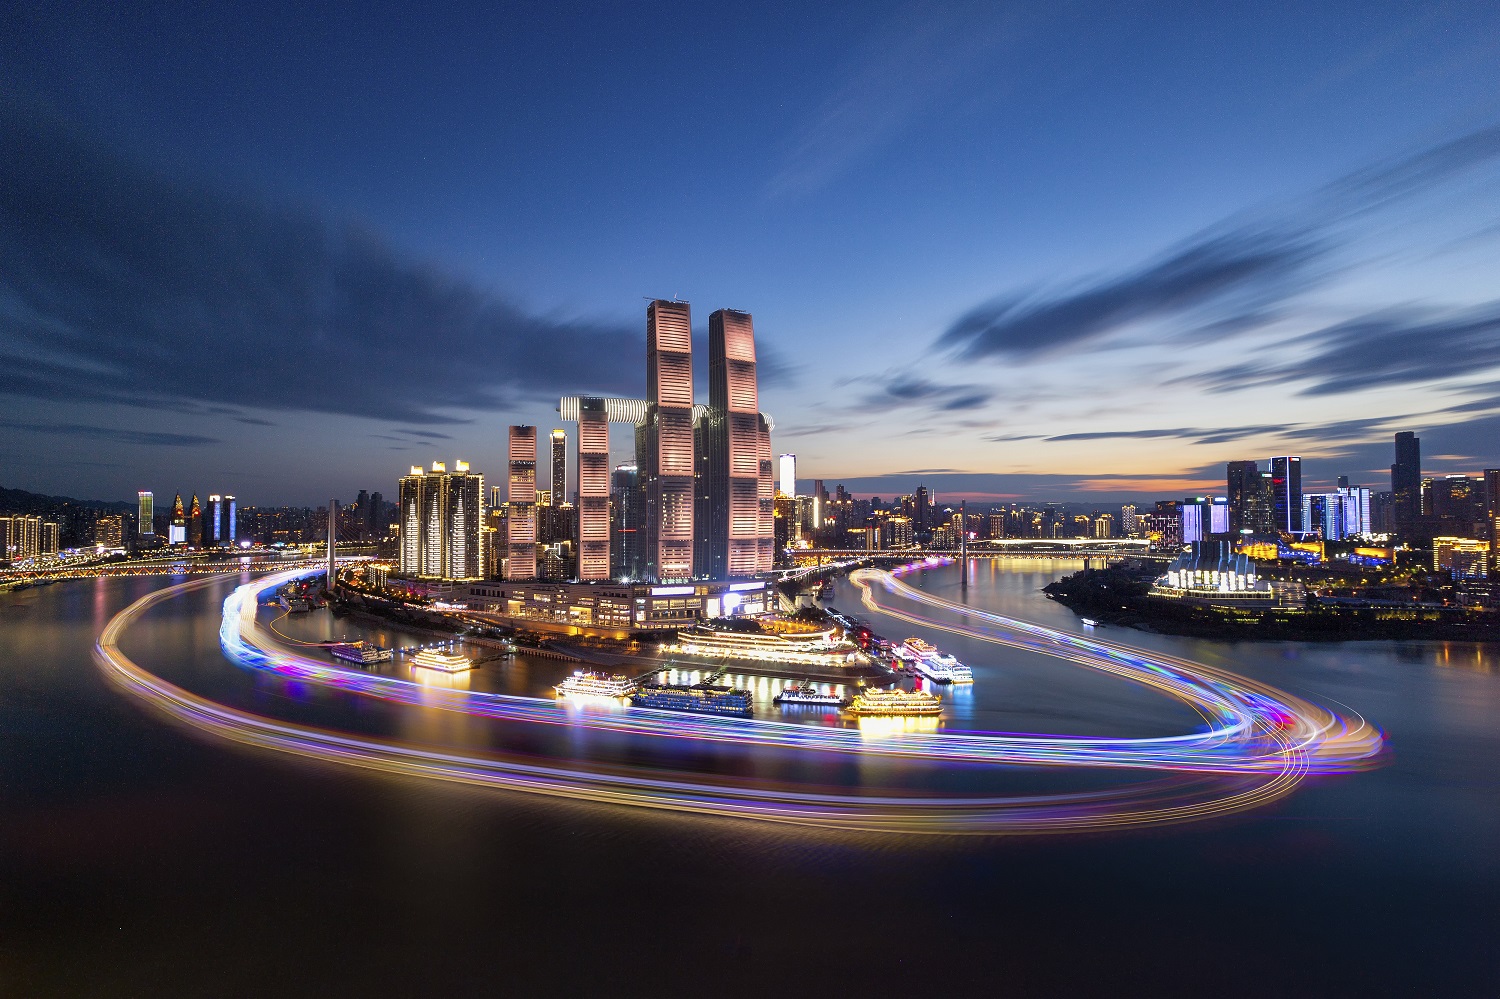 Long exposure photo of the Raffles City skyline. The photo is taken on a meandering river highlighting multiple highrise buildings lit up with multicolor lights